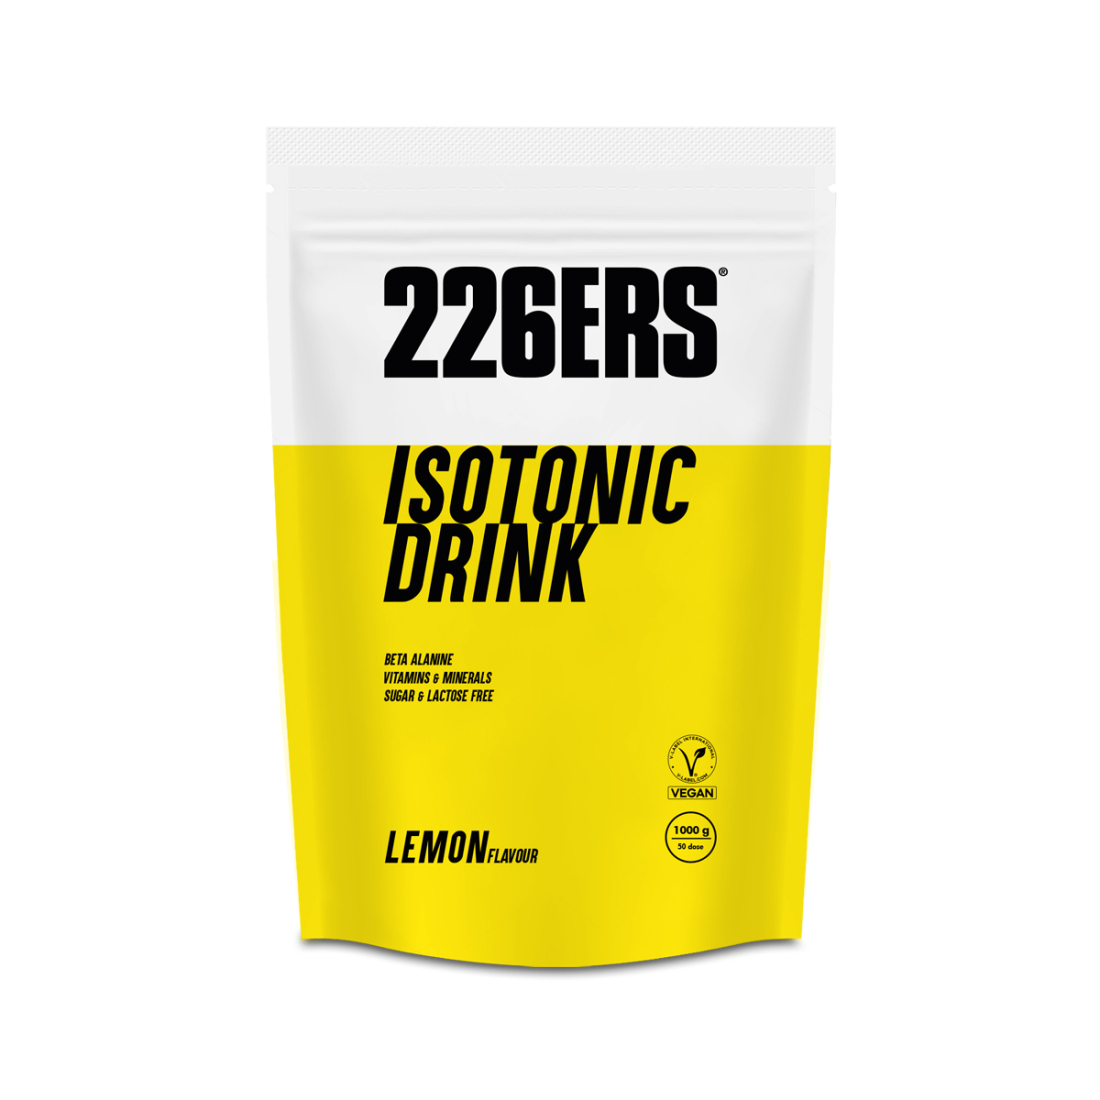 ISOTONIC DRINK - Isotonisches Getränk